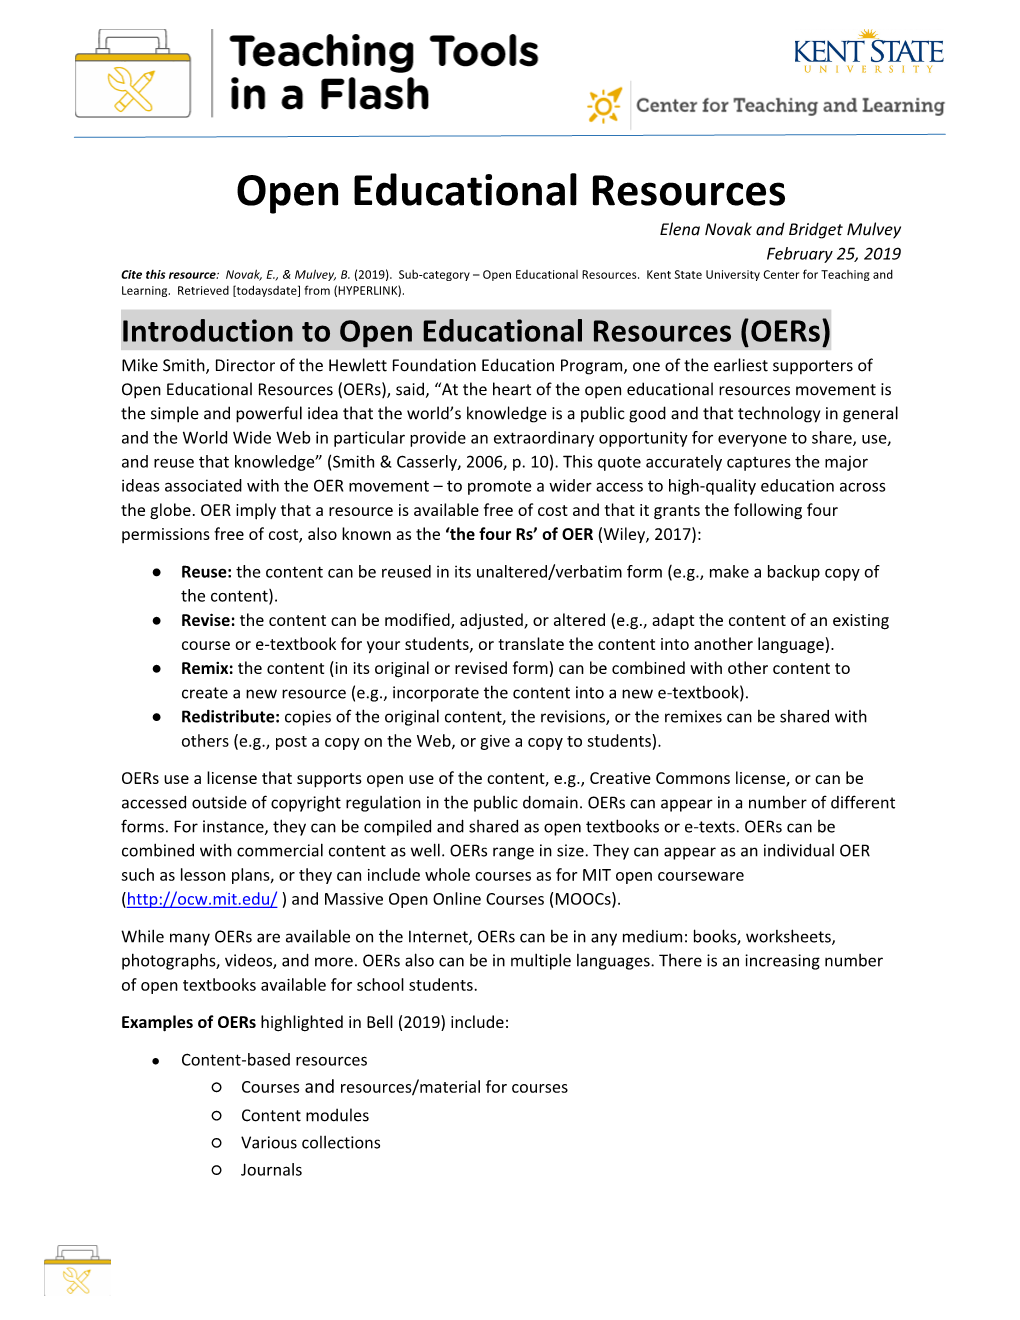 Teaching Tools—Open Educational Resources